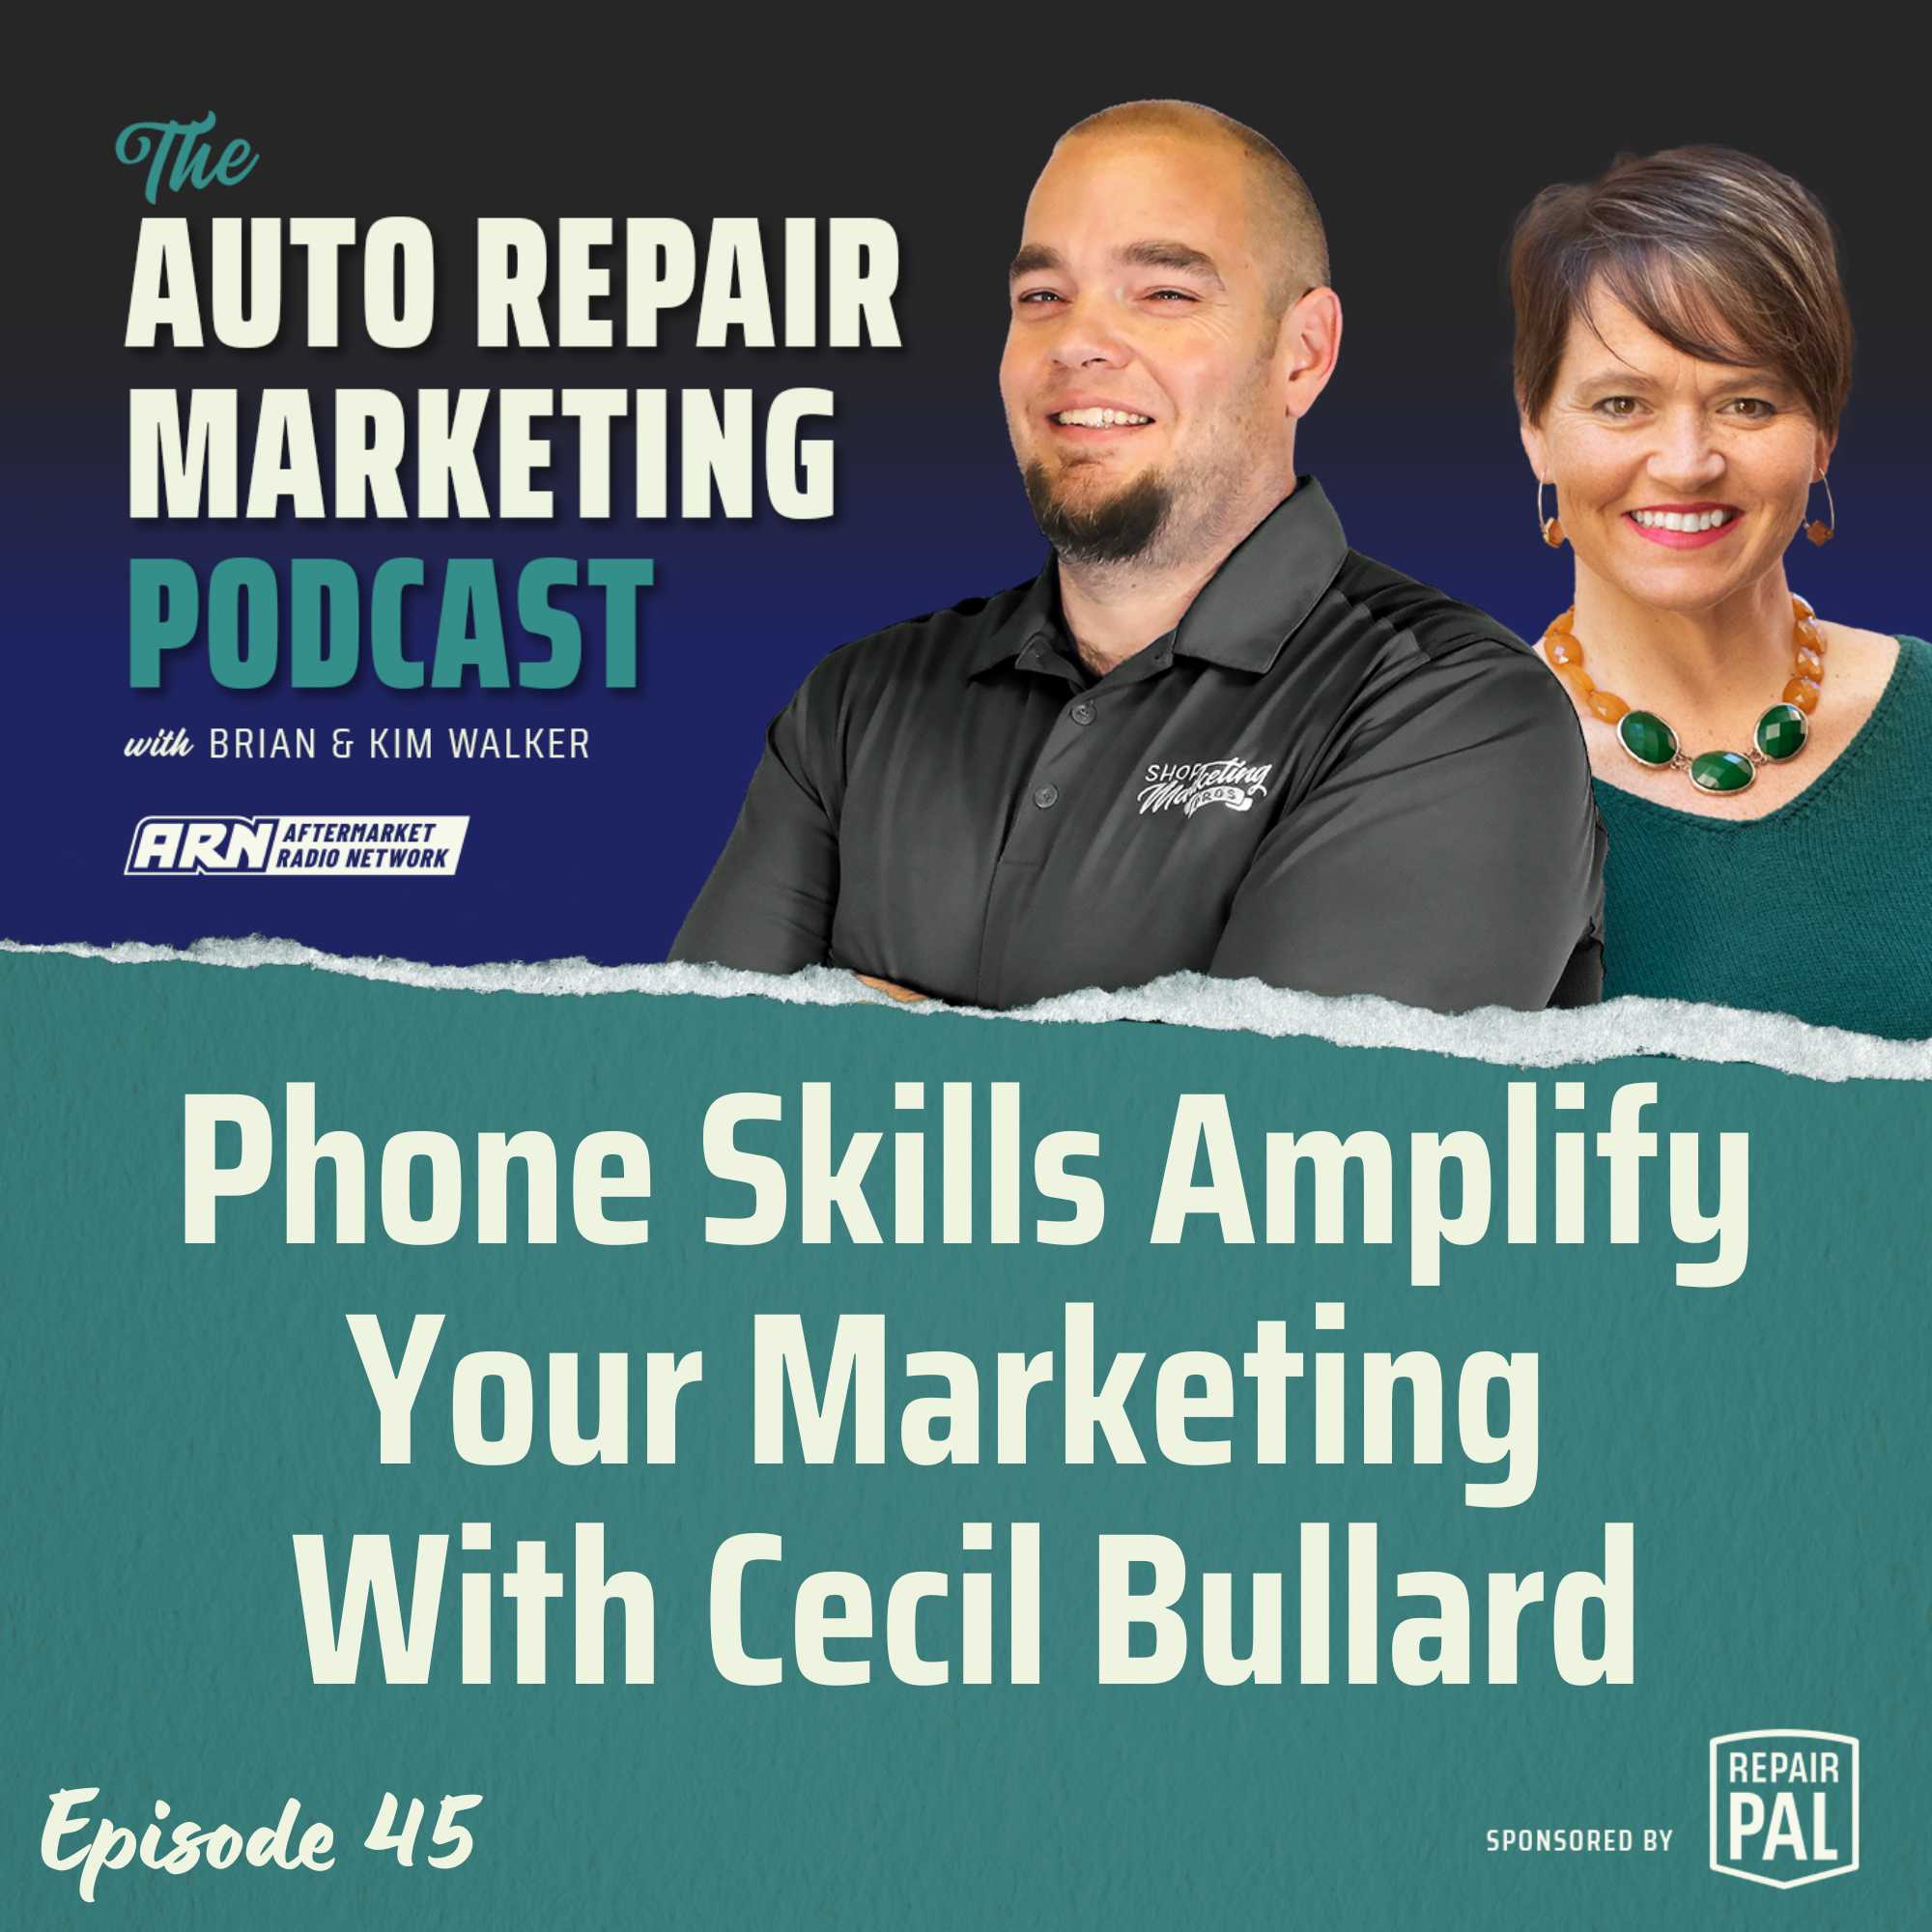 The Auto Repair Marketing Podcast Episode 45. Brian & Kim Walker talking about the topic "Phone Skills Amplify Your Marketing w/ Cecil Bullard". Sponsored by Repair Pal.